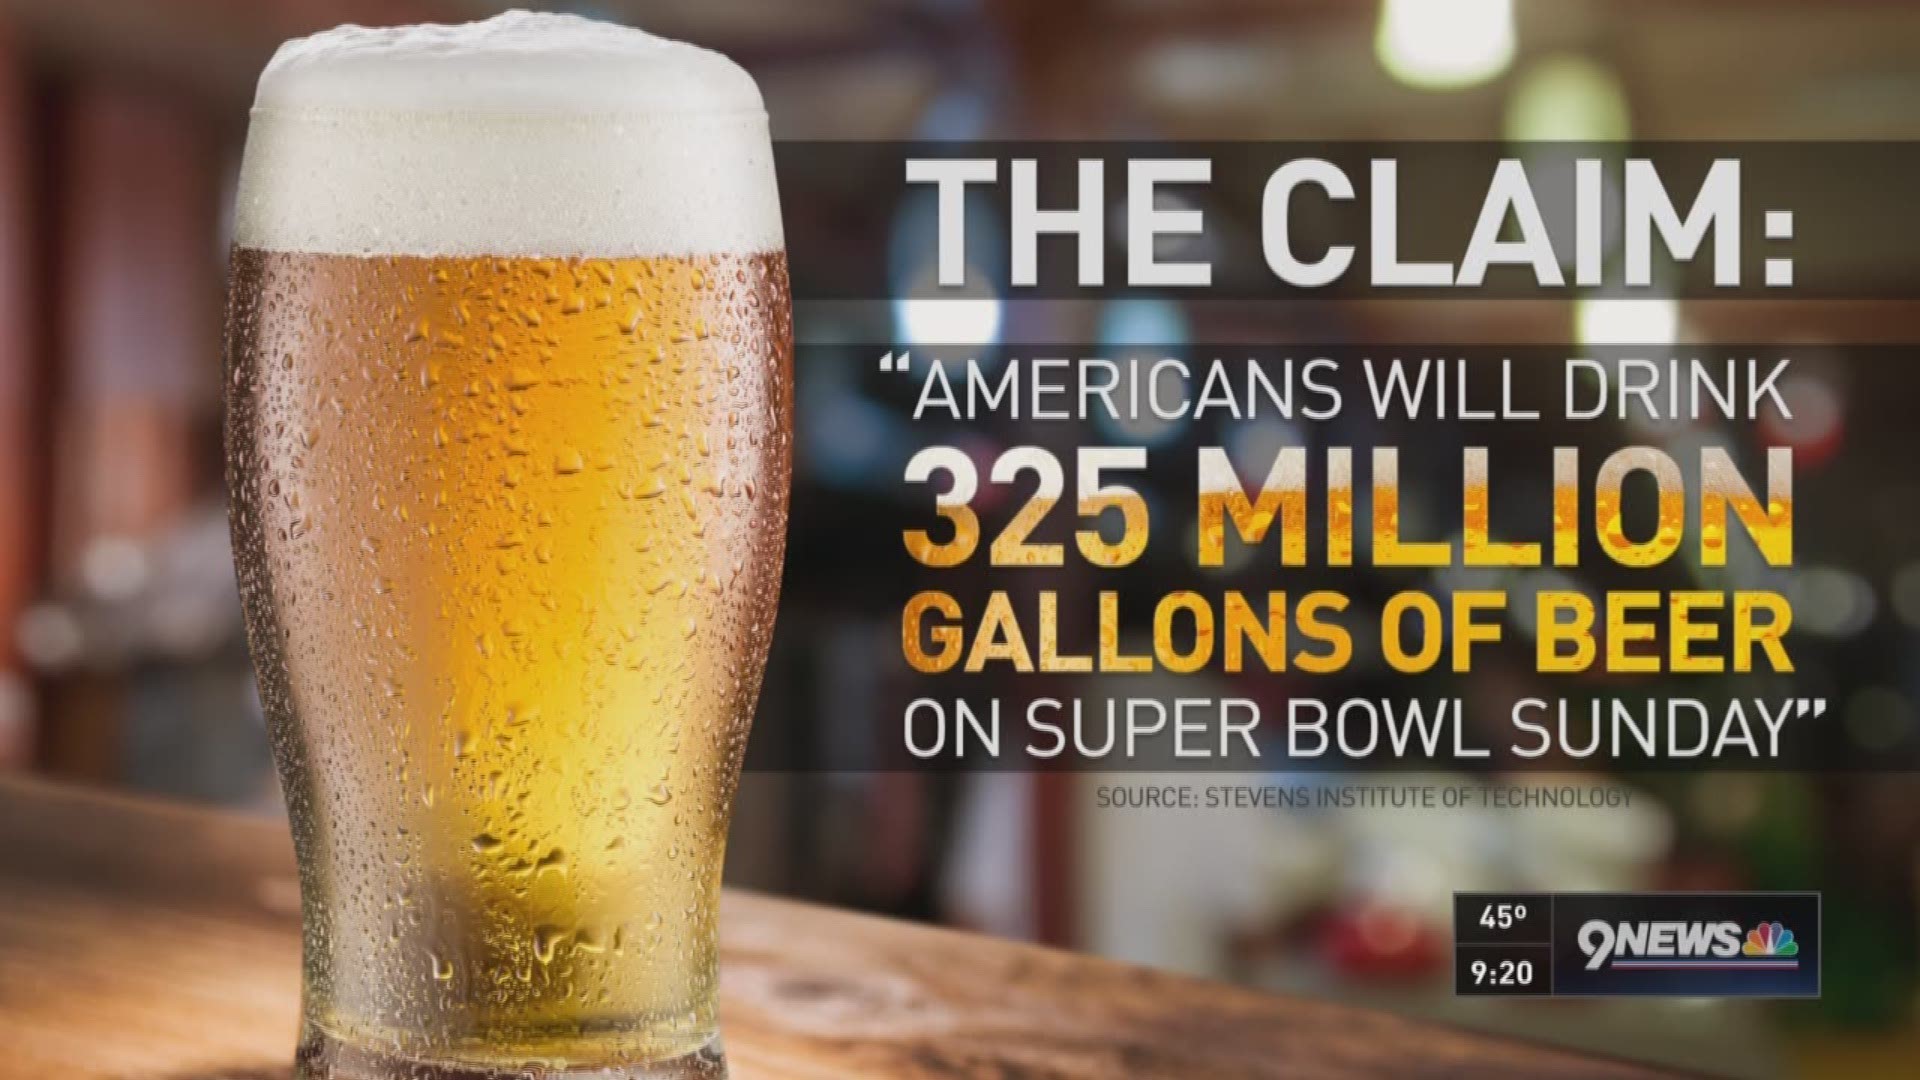 Verify How much beer can Americans drink on Super Bowl Sunday?